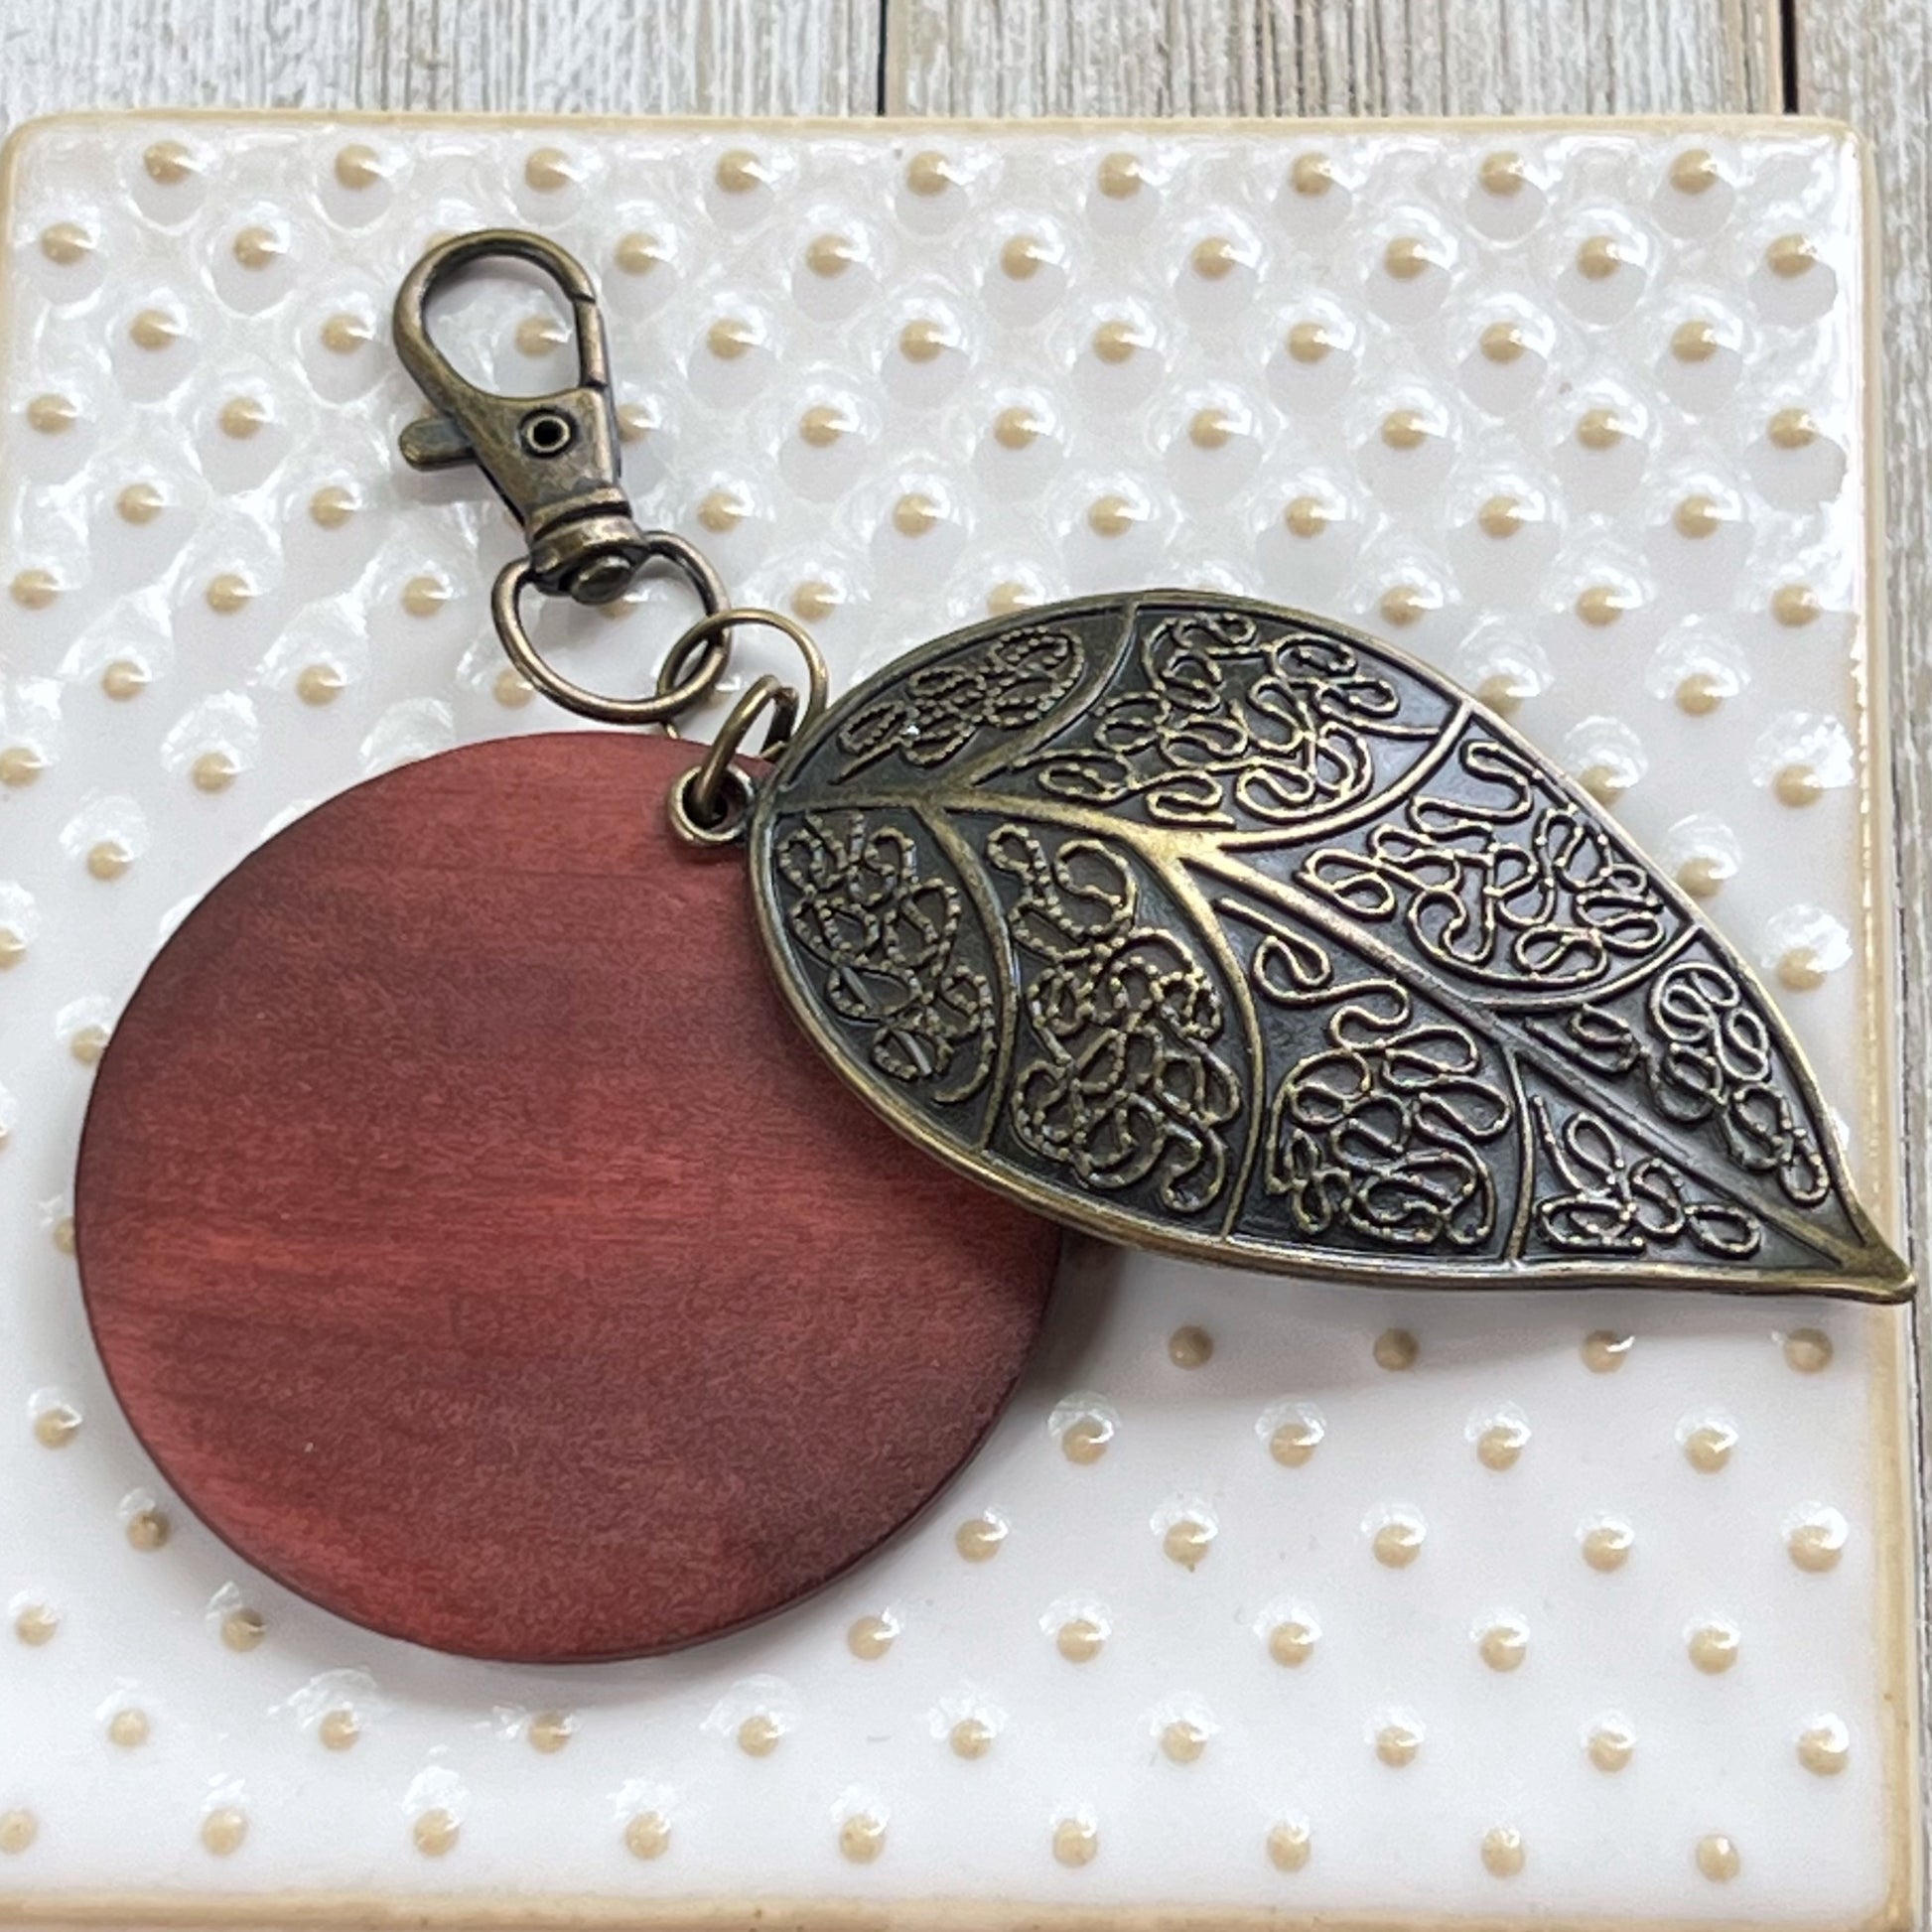 Antiqued Brass Leaf Zipper Pull Keychain & Handbag Charm with Red Wood Accent